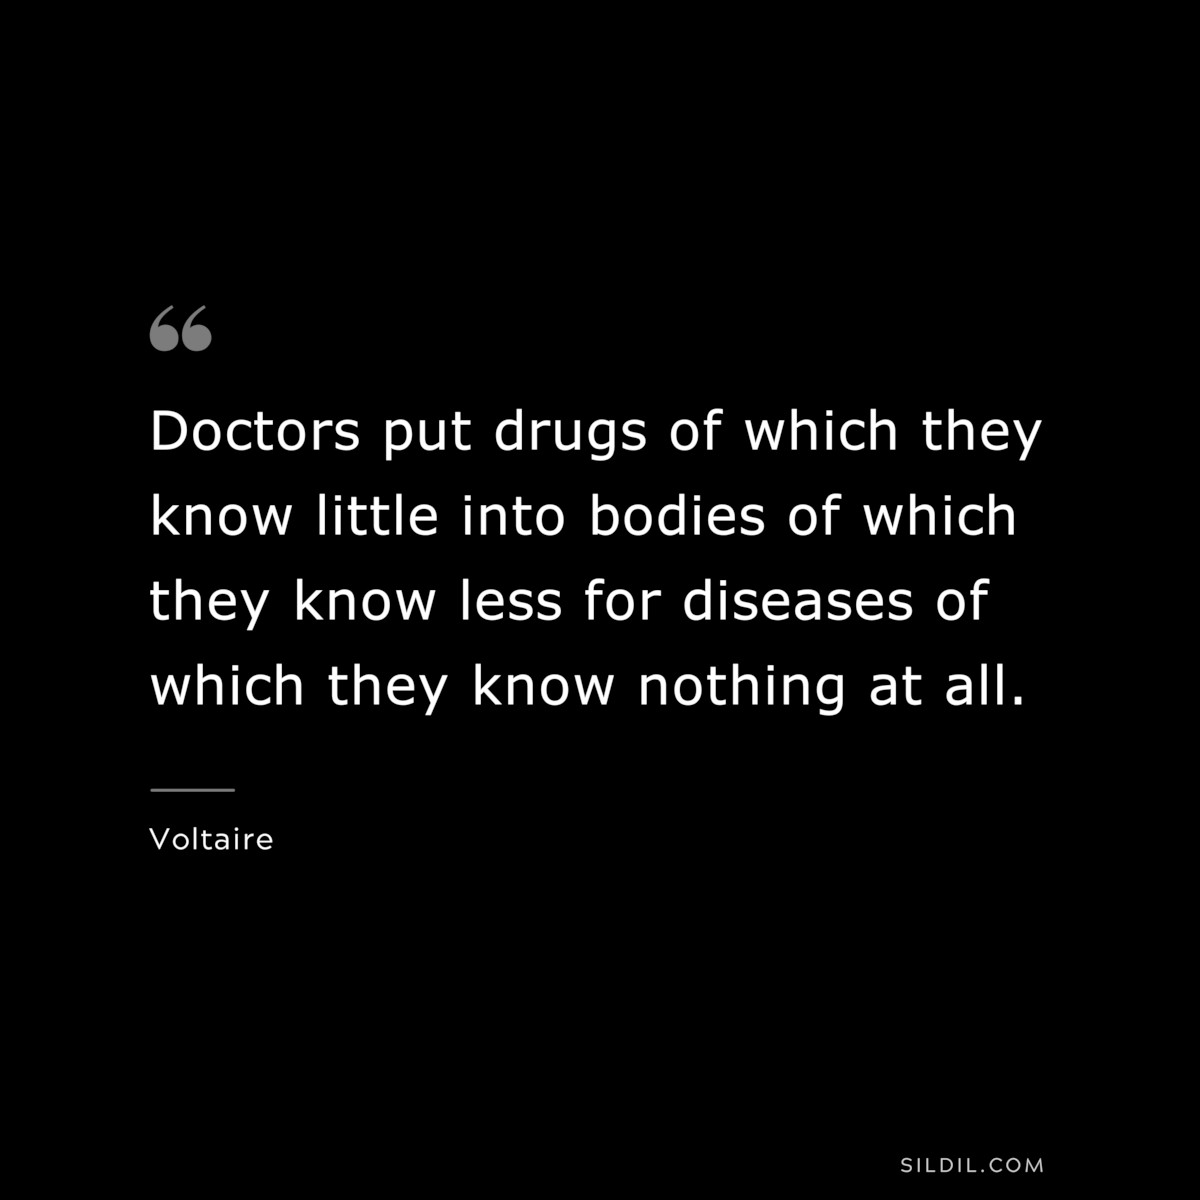 Doctors put drugs of which they know little into bodies of which they know less for diseases of which they know nothing at all. ― Voltaire